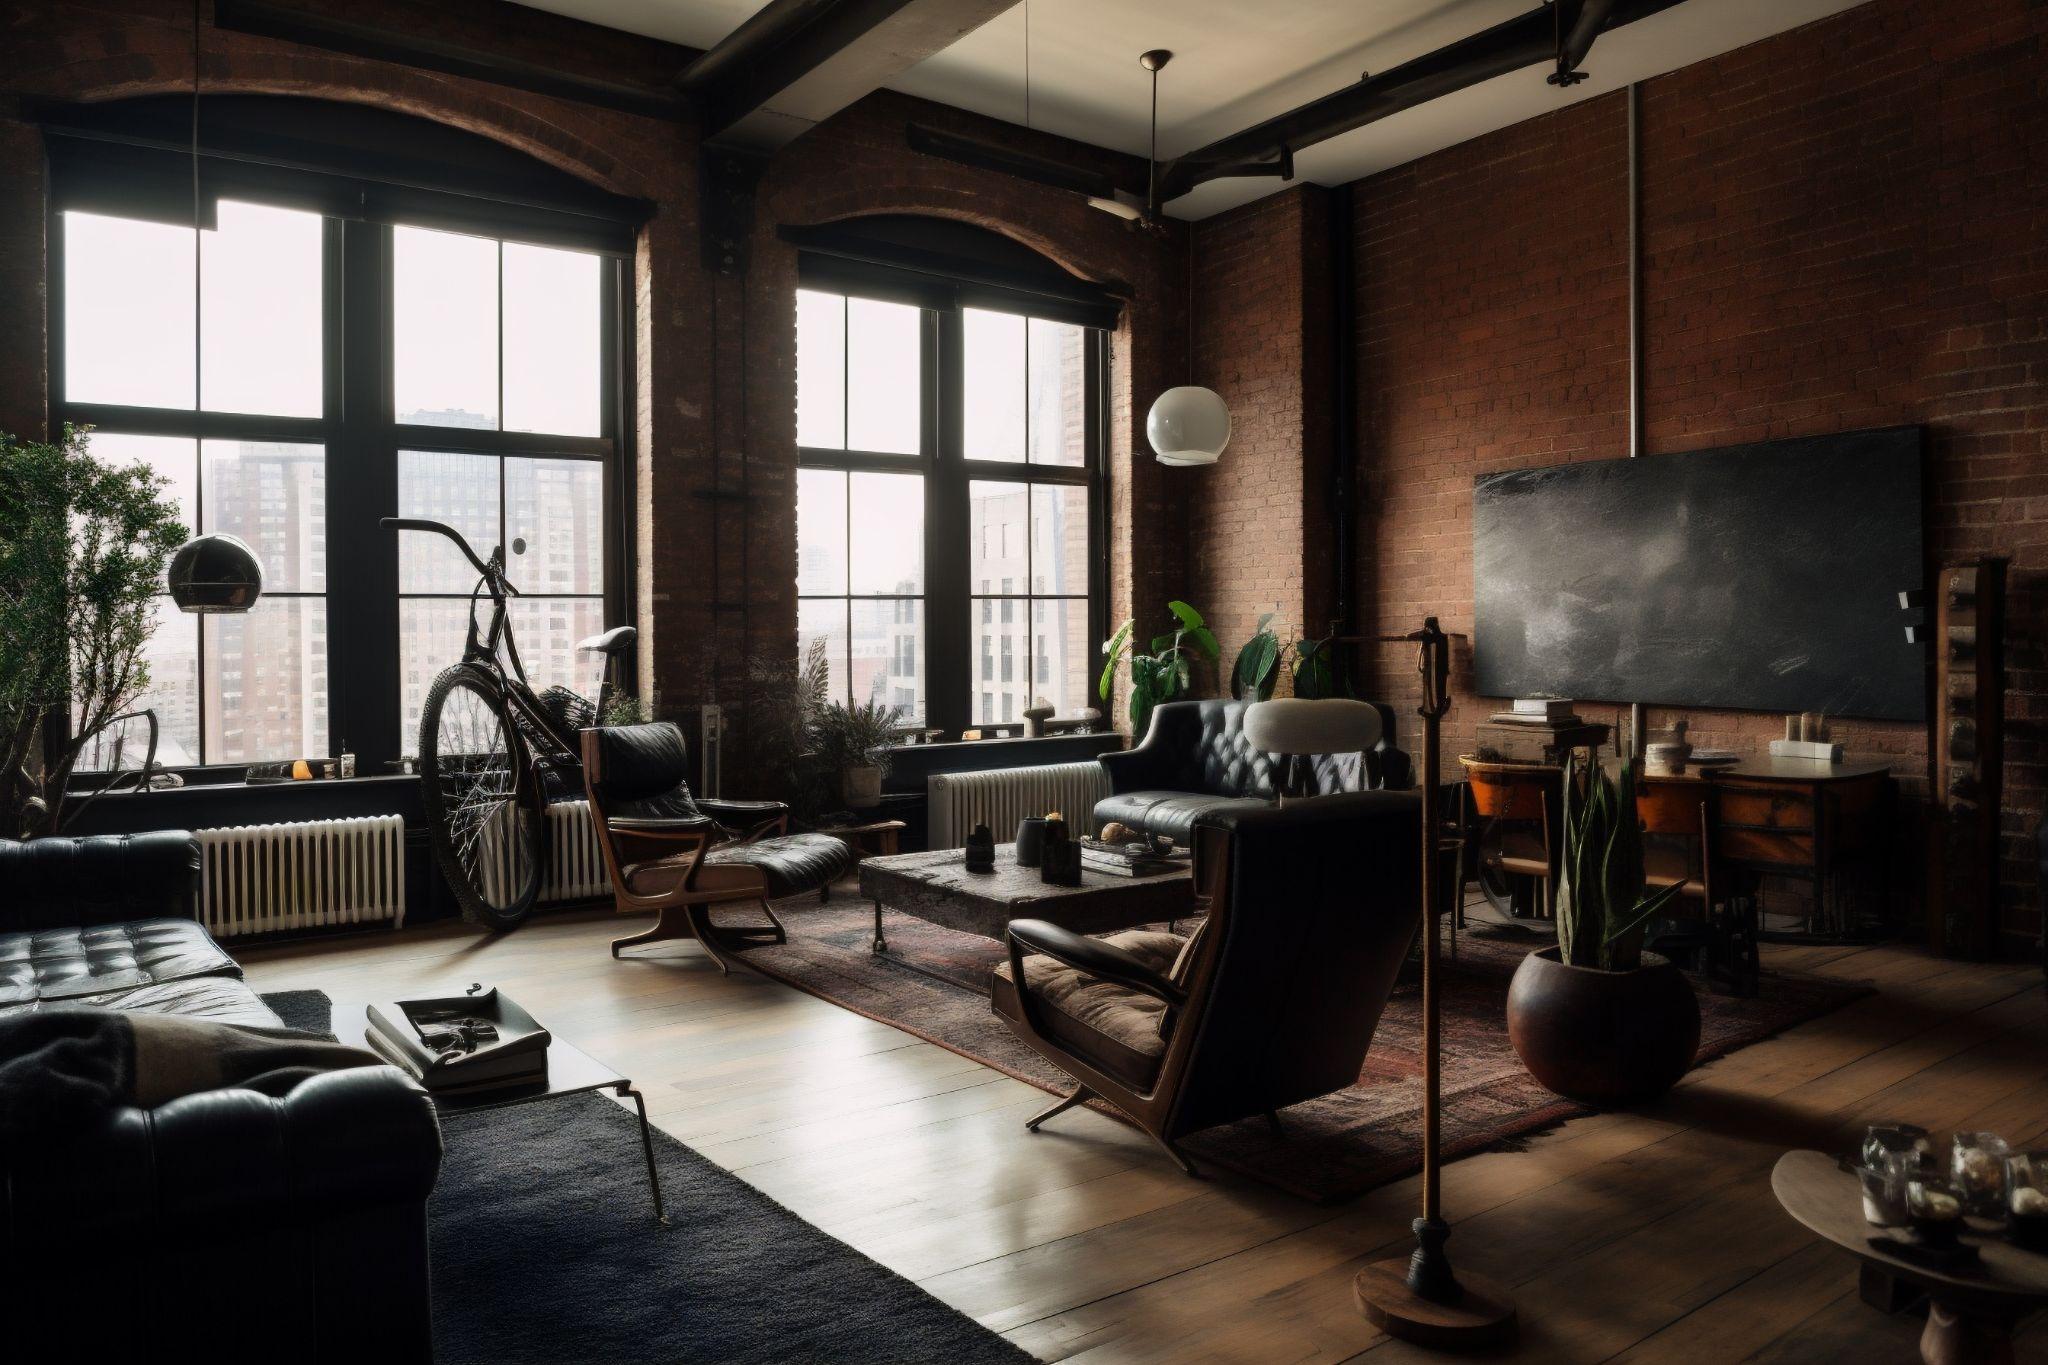 Interior of gorgeous NYC loft showcasing exposed brick walls and landscape buildings